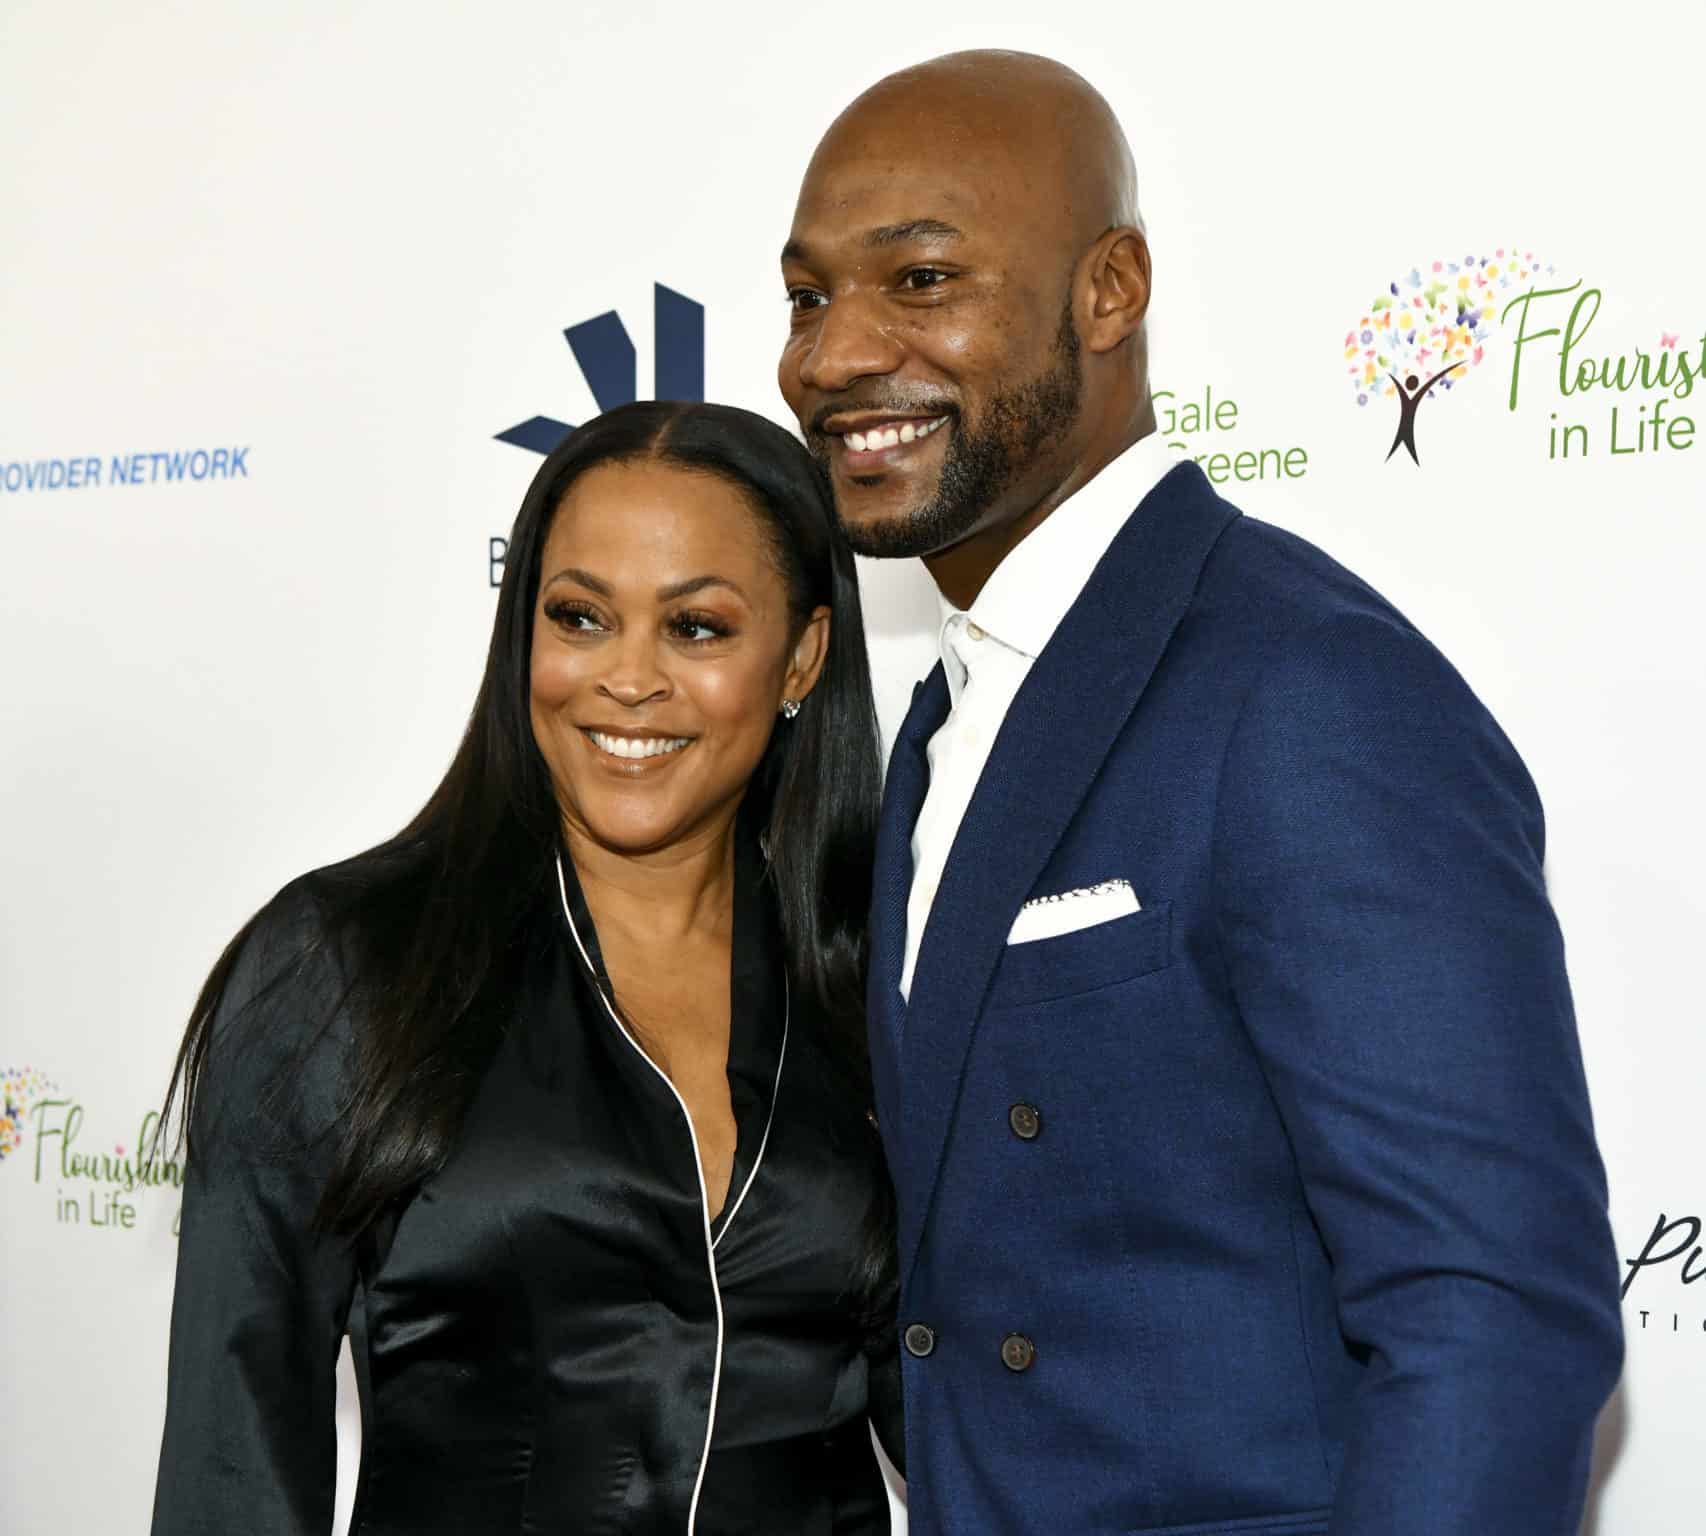 Shaunie O'Neal and Pastor Keion Henderson are now engaged after nearly two years of dating. He popped the big question last week.